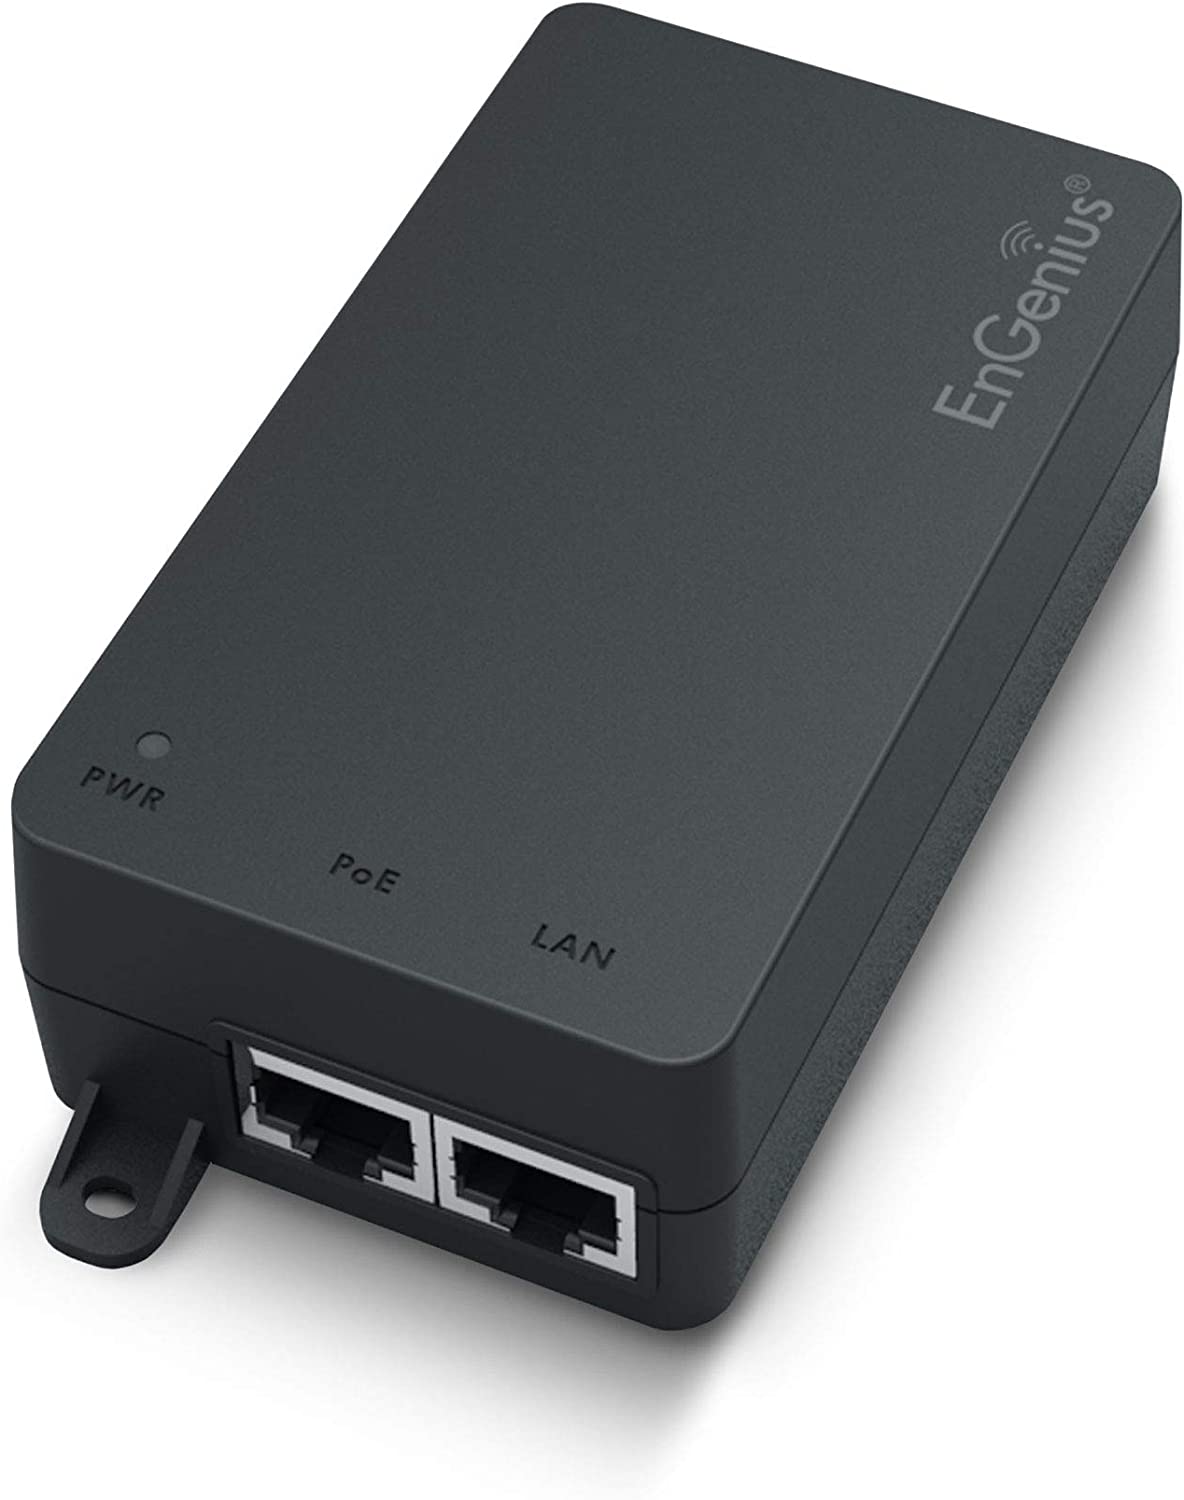 EnGenius Technologies 802.3at/af Gigabit PoE+ Injector Features up to 30 Watts of Output Power for Distances up to 100M, Plug-n-Play, Auto Detects Power (EPA5006GAT)